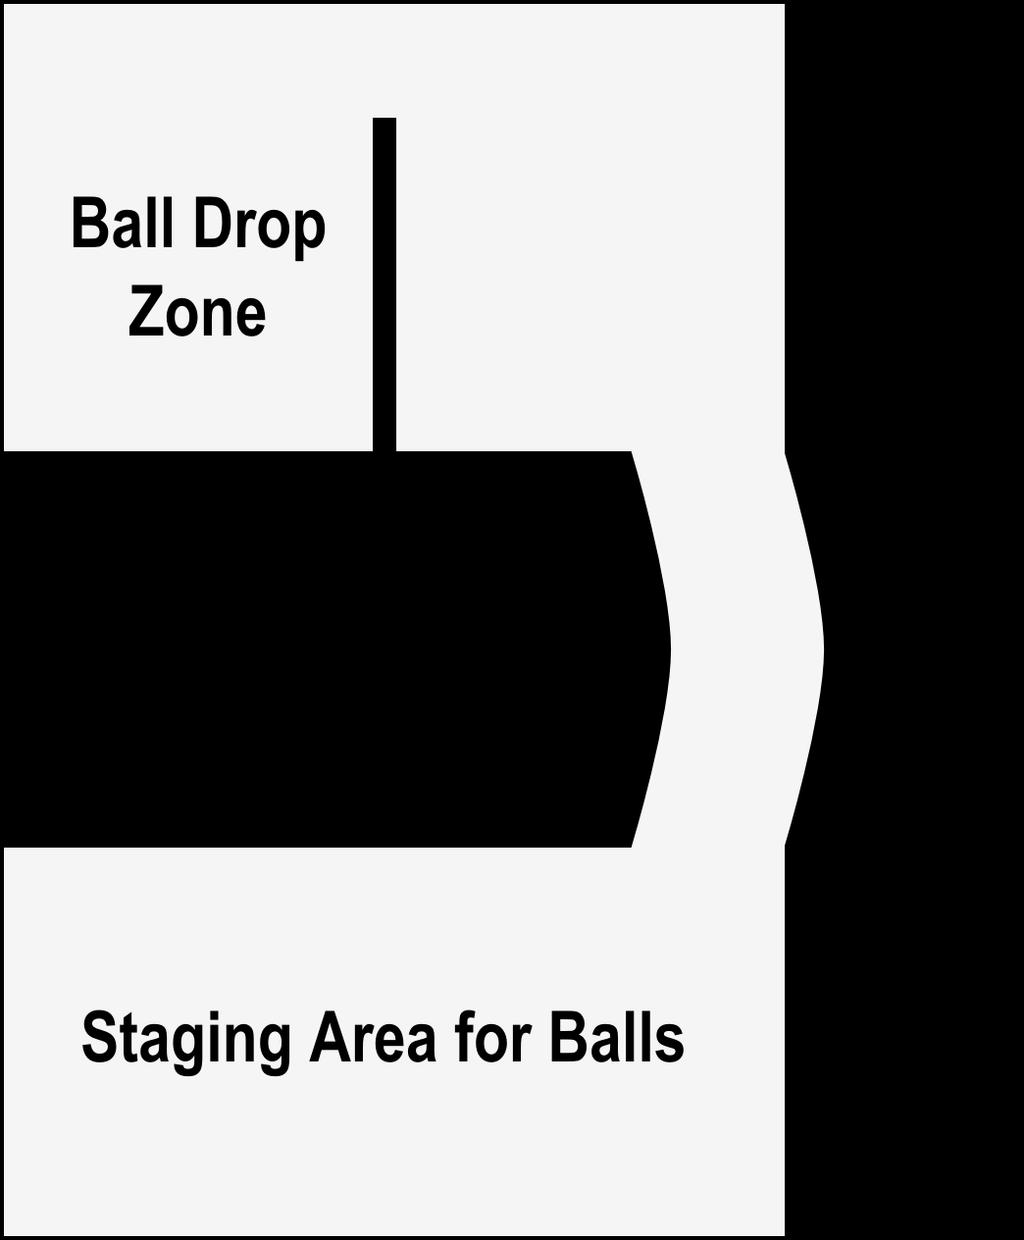 Ball Course: DESCRIPTION: Using robots, participants will maneuver three different sizes of balls into holes on a botcourse. There will be 2 of each size ball, small, medium and large.